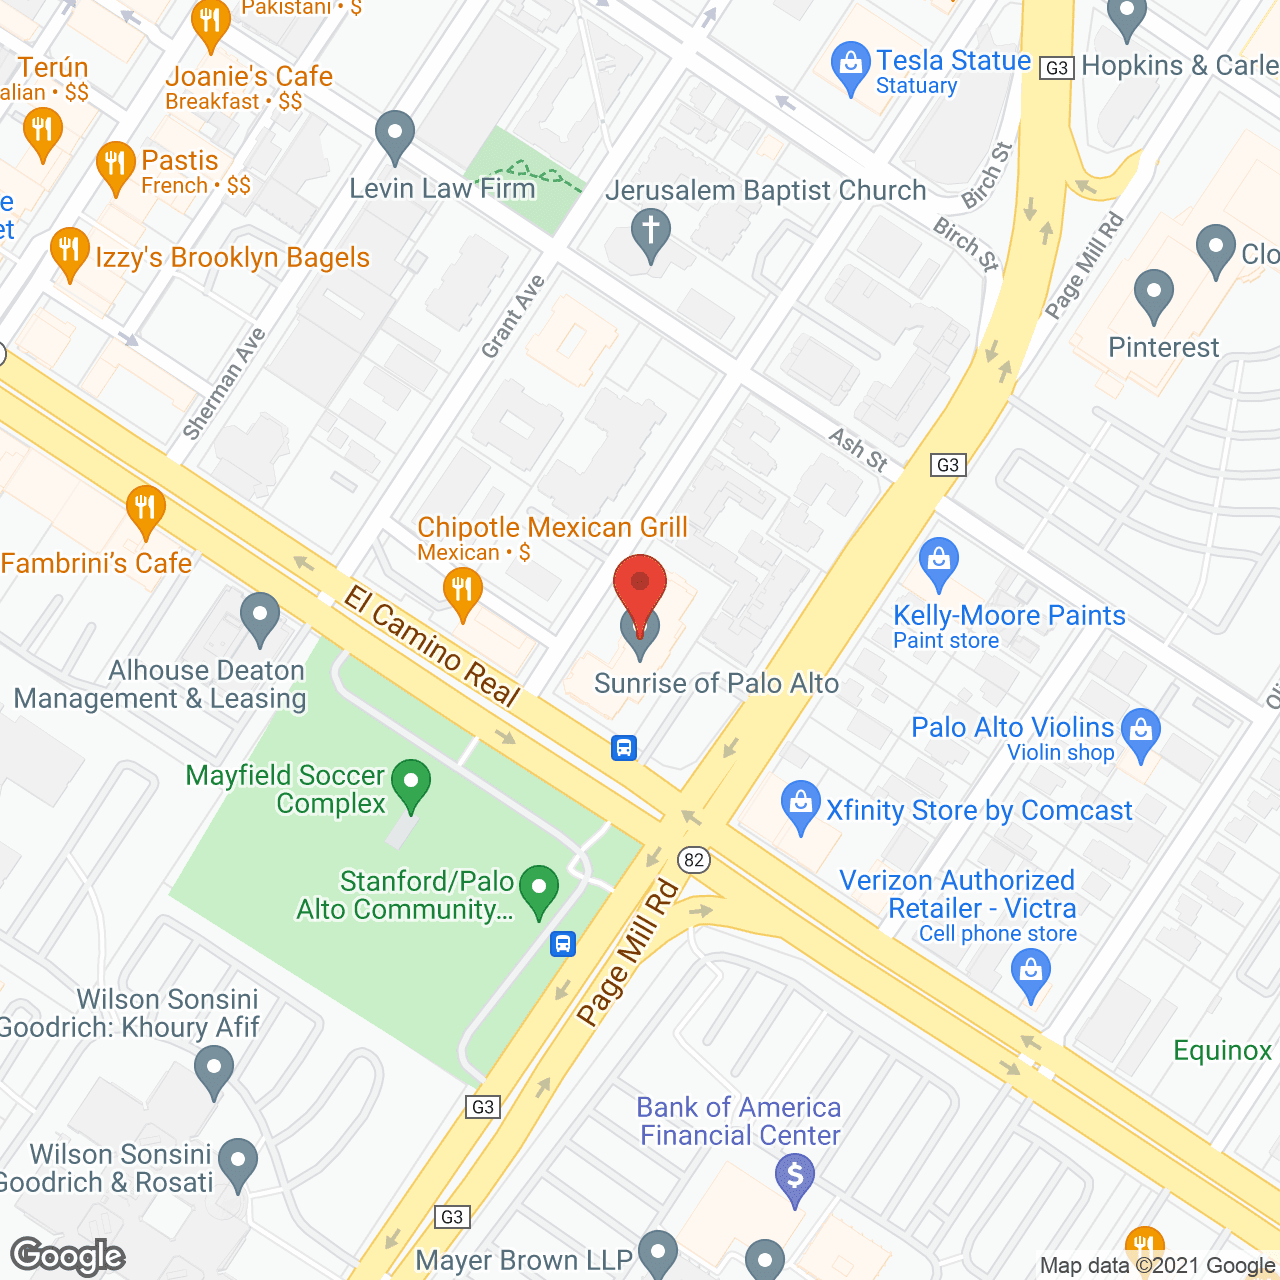 Ivy Park at Palo Alto in google map